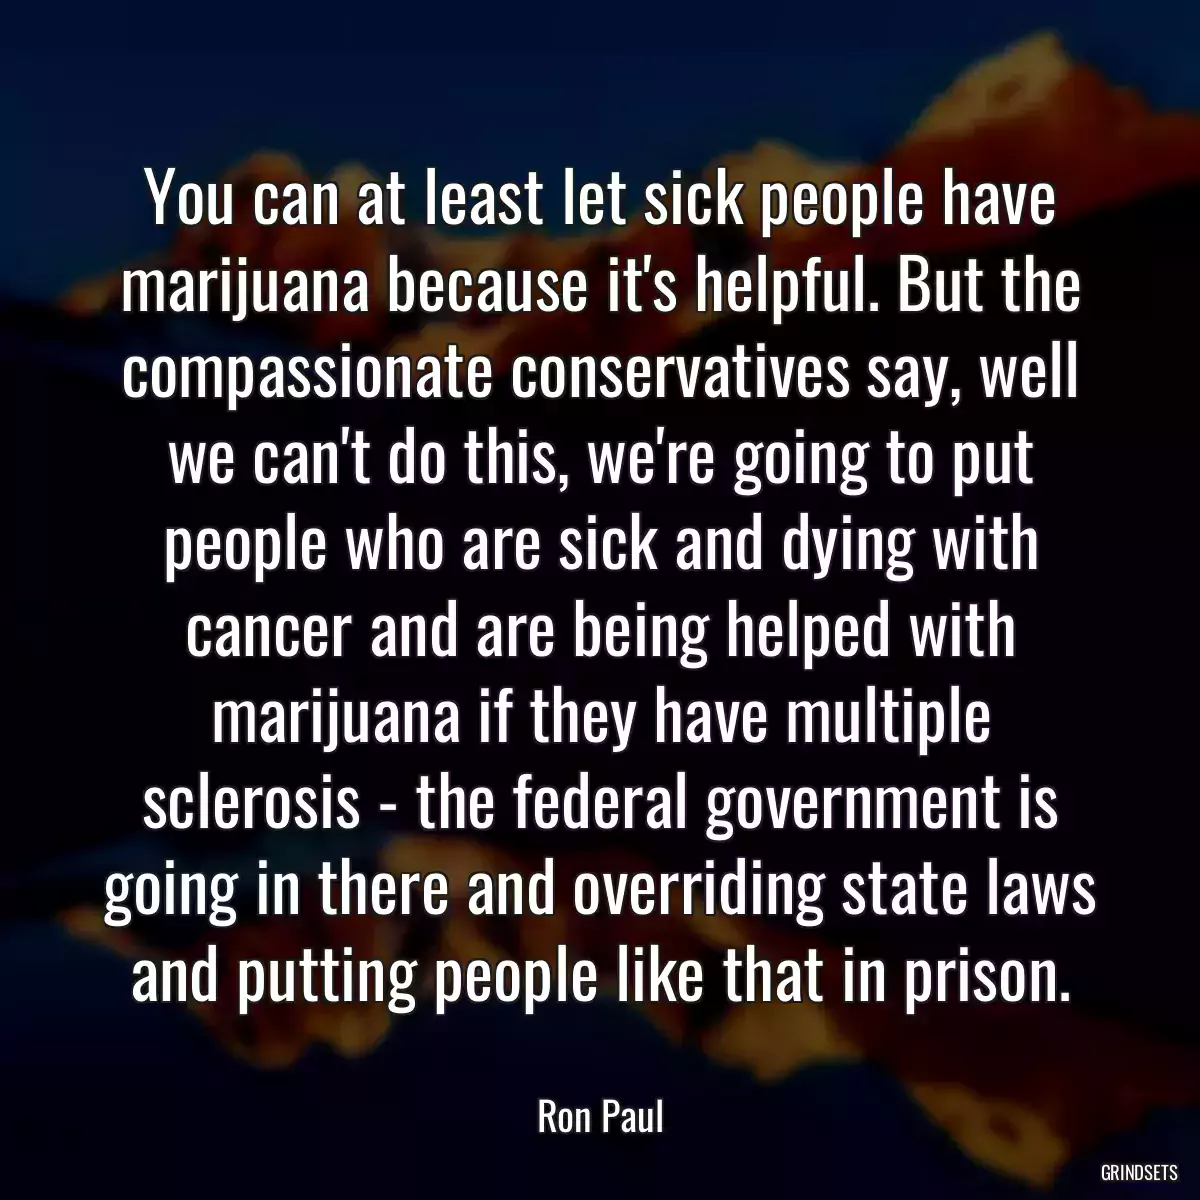 You can at least let sick people have marijuana because it\'s helpful. But the compassionate conservatives say, well we can\'t do this, we\'re going to put people who are sick and dying with cancer and are being helped with marijuana if they have multiple sclerosis - the federal government is going in there and overriding state laws and putting people like that in prison.